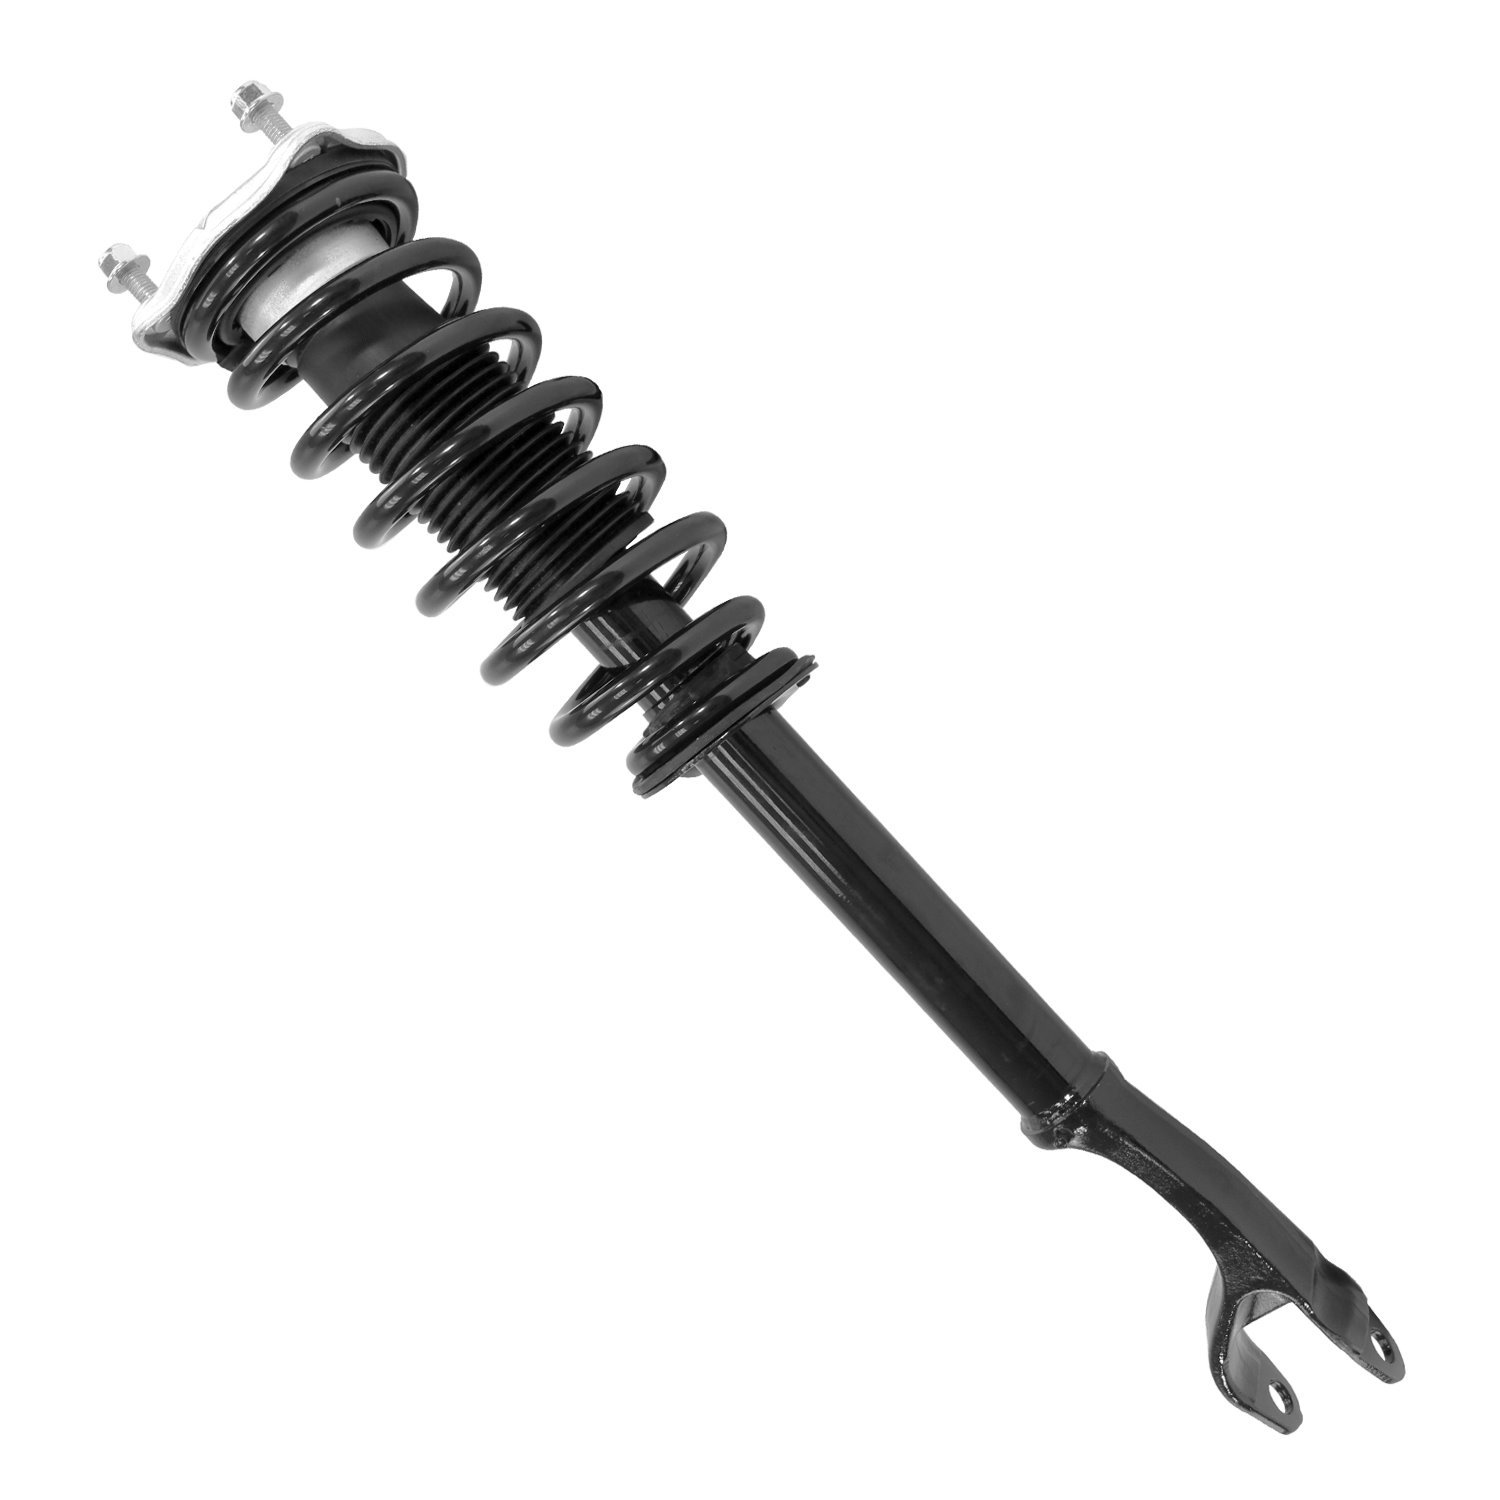 13471 Front Suspension Strut & Coil Spring Assemby Fits Select Mercedes-Benz